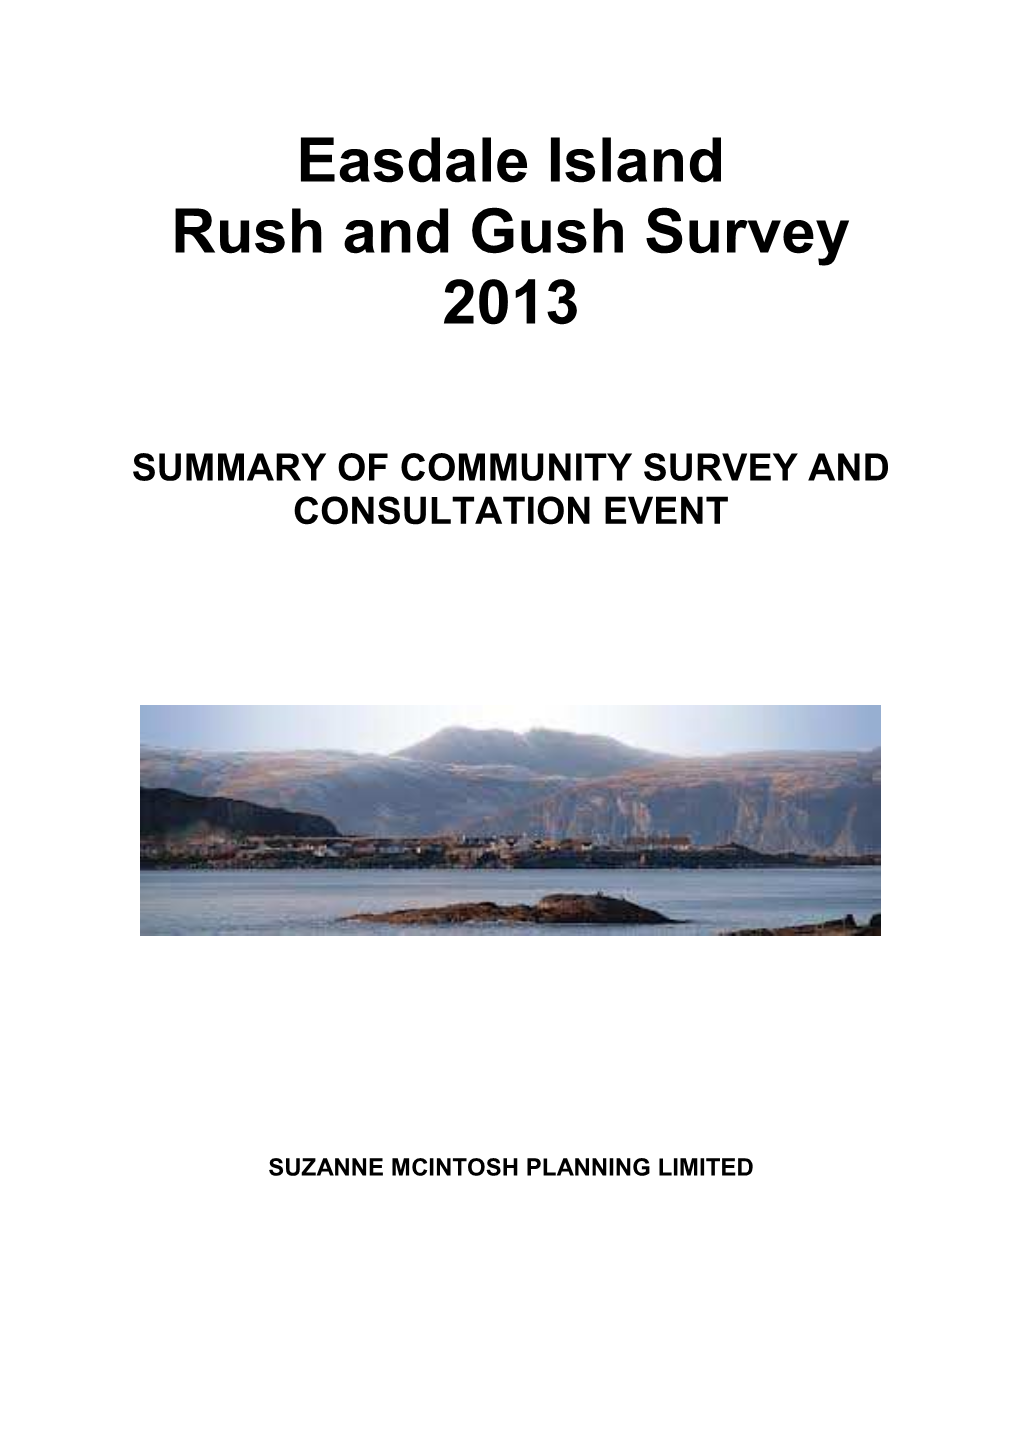 Easdale Island Rush and Gush Survey 2013 SUMMARY OF